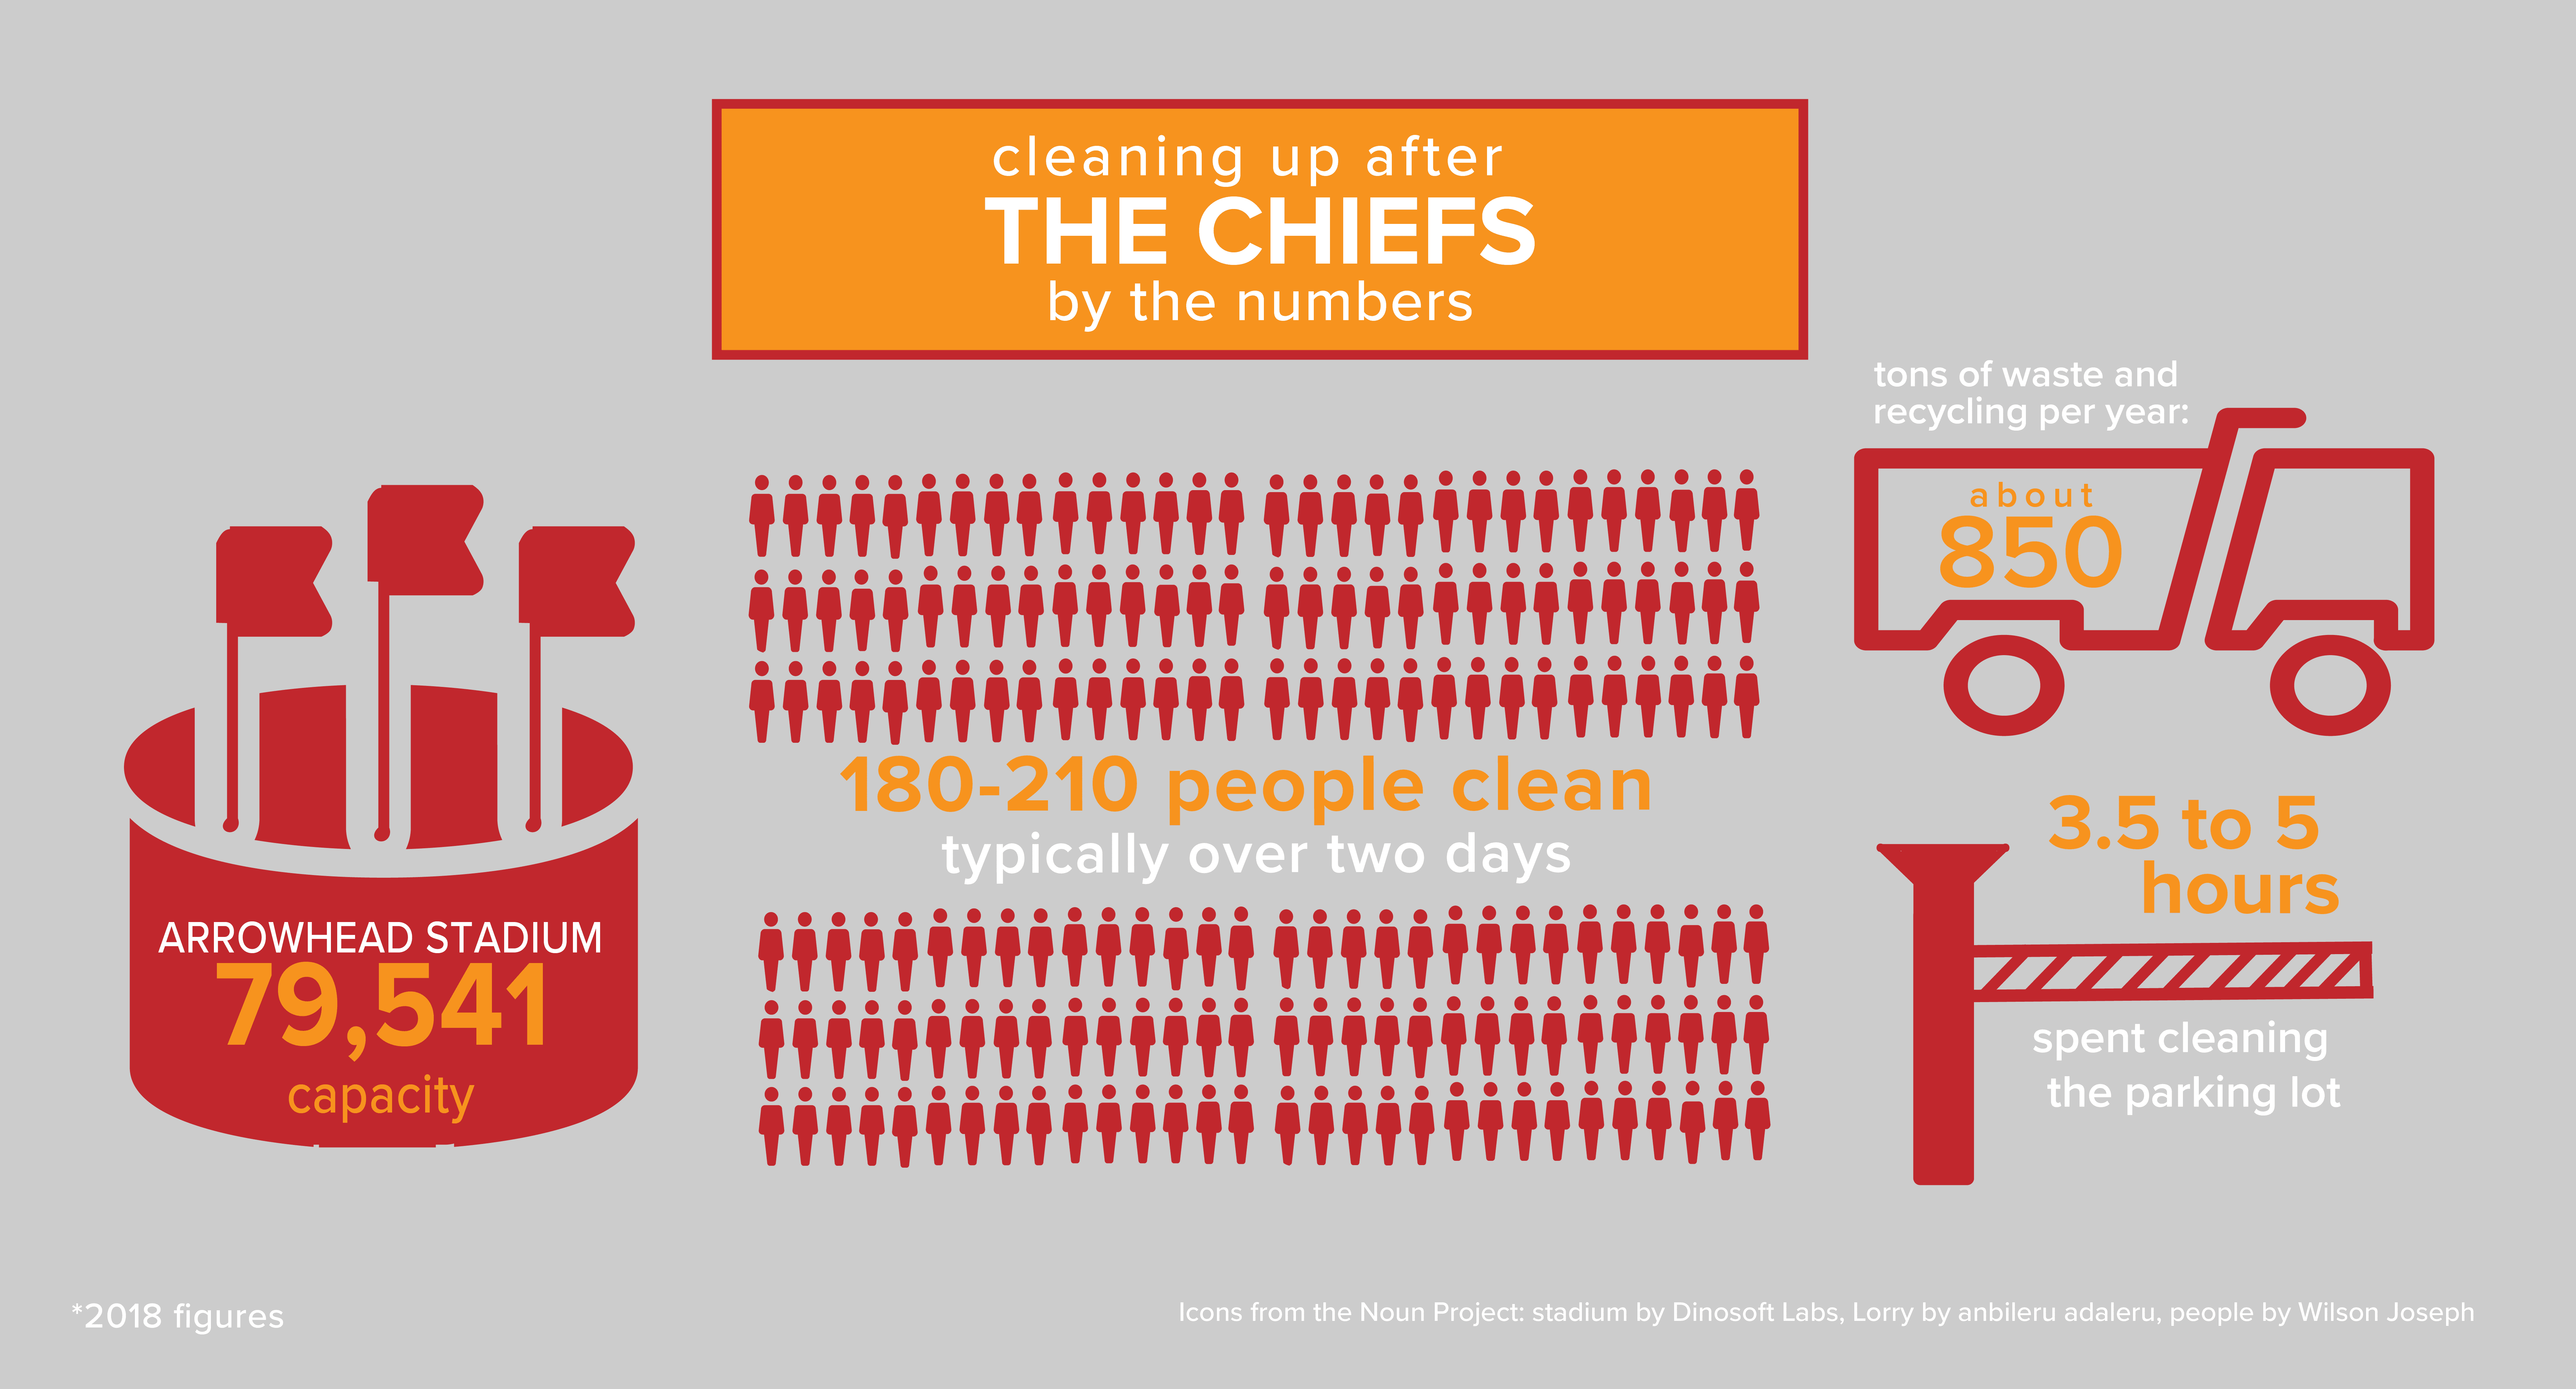 Cleaning up after The Chiefs by the numbers - infographic showing that Arrowhead stadium has a 79,541 person capacity, that 180-210 people clean, typically over two days and that about 850 tons of waste and recycling per year are removed. 3.5 to 5 hours are spent cleaning the parking lot. 2018 figures.